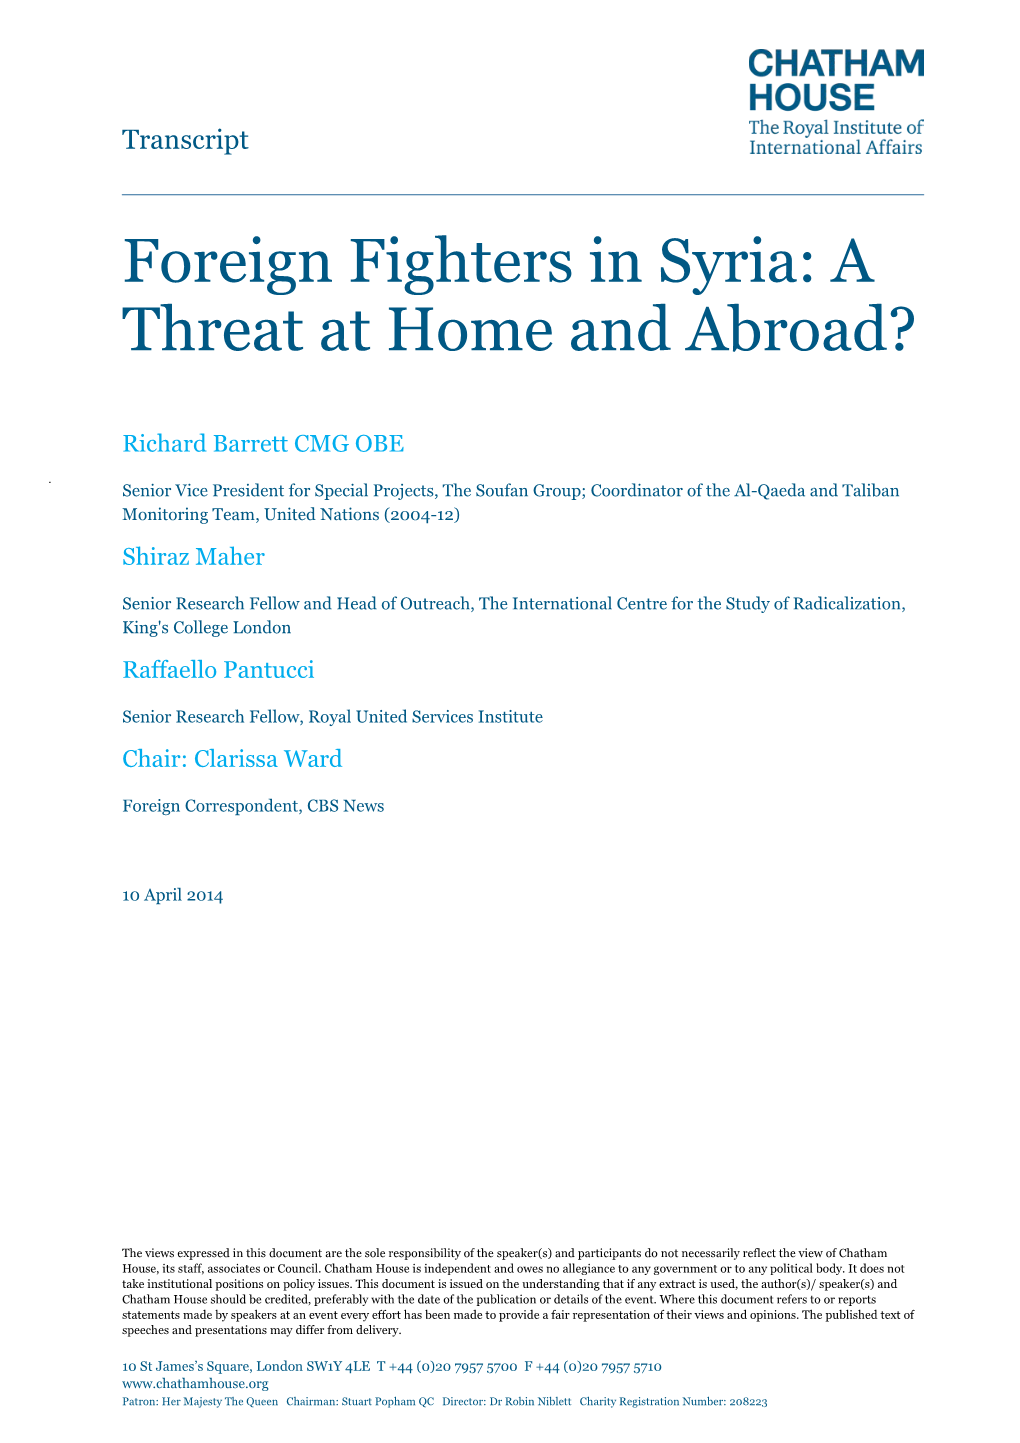 Foreign Fighters in Syria: a Threat at Home and Abroad?